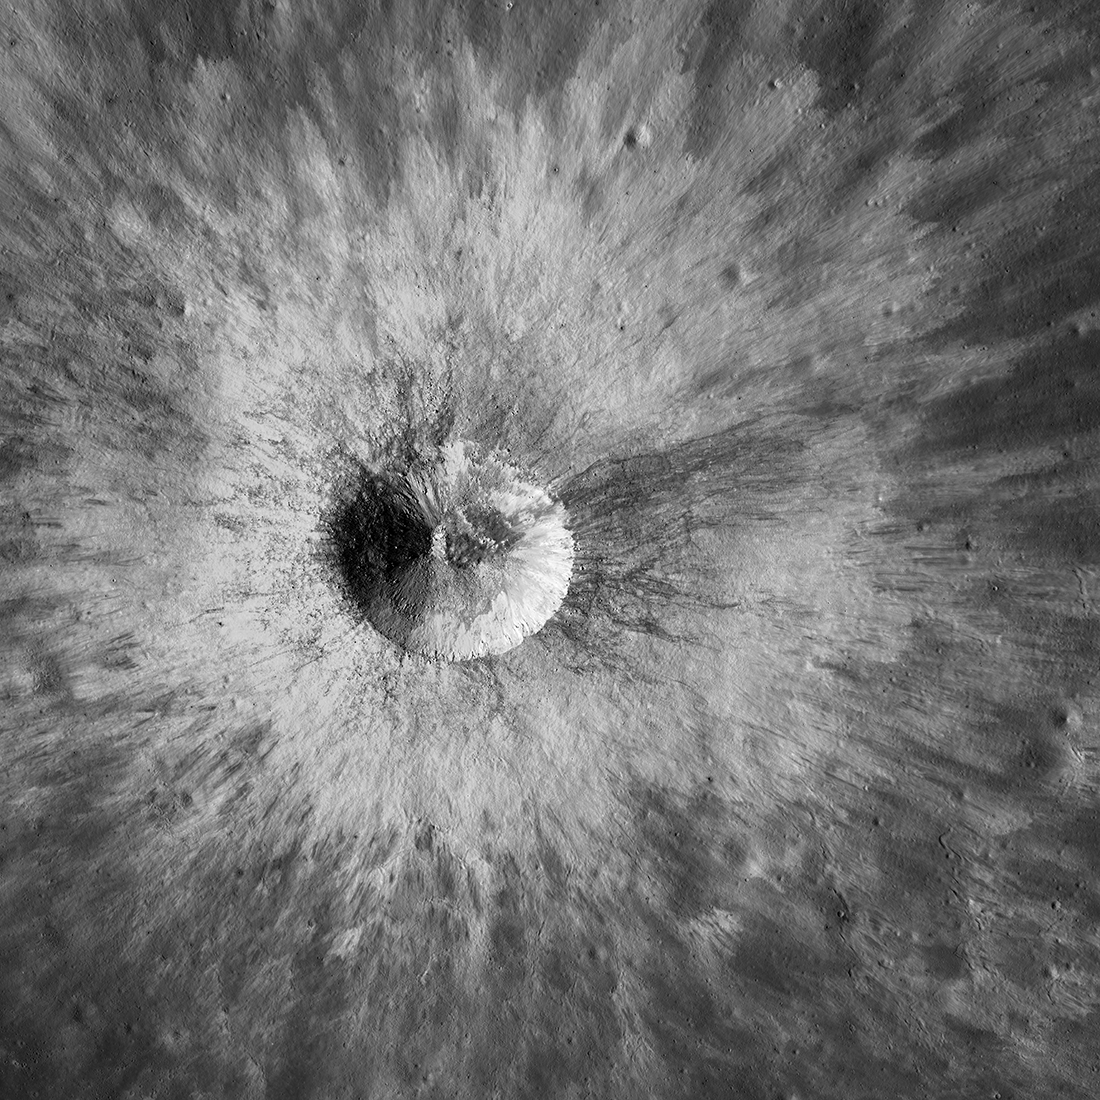 bright crater seen from directly above